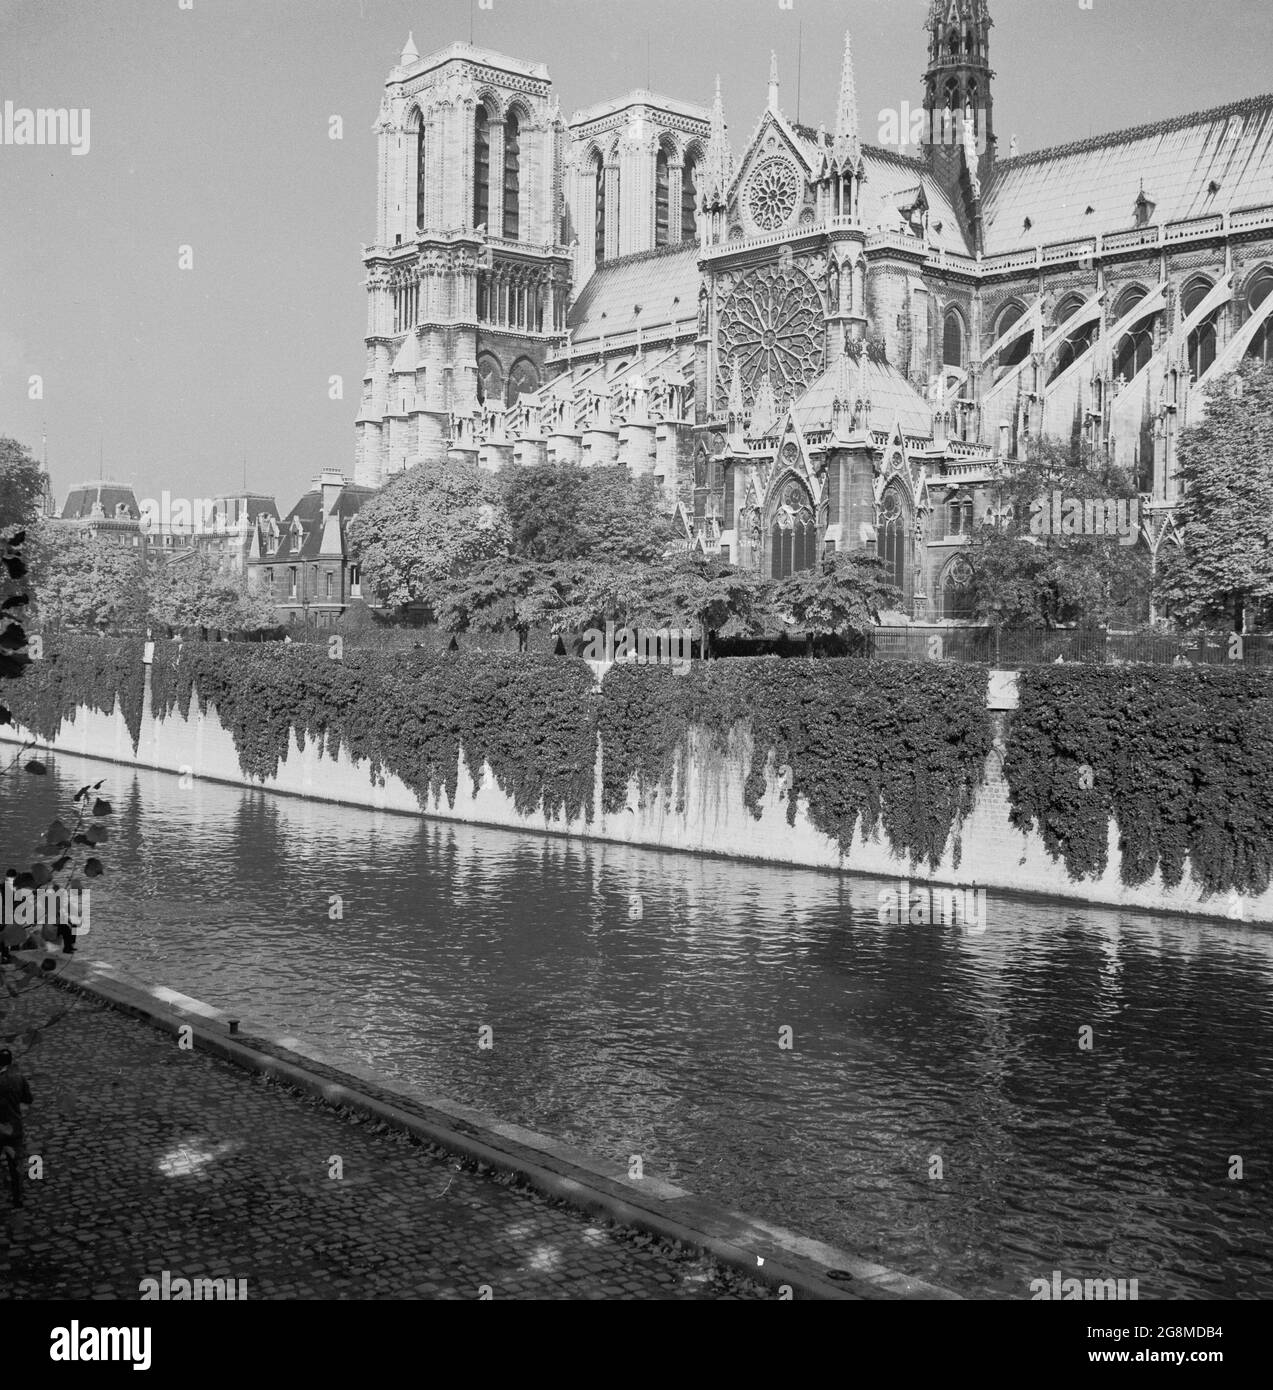 1950s, historical, view from this era across the river Seine, of the exterior of the famous Notre-dame cathedral, Paris, France. A medieval Catholic church on the IIe de la Cite in the 4th arrondissement of the city, it is considered one of the finest examples of French Gothic architecture. Stock Photo